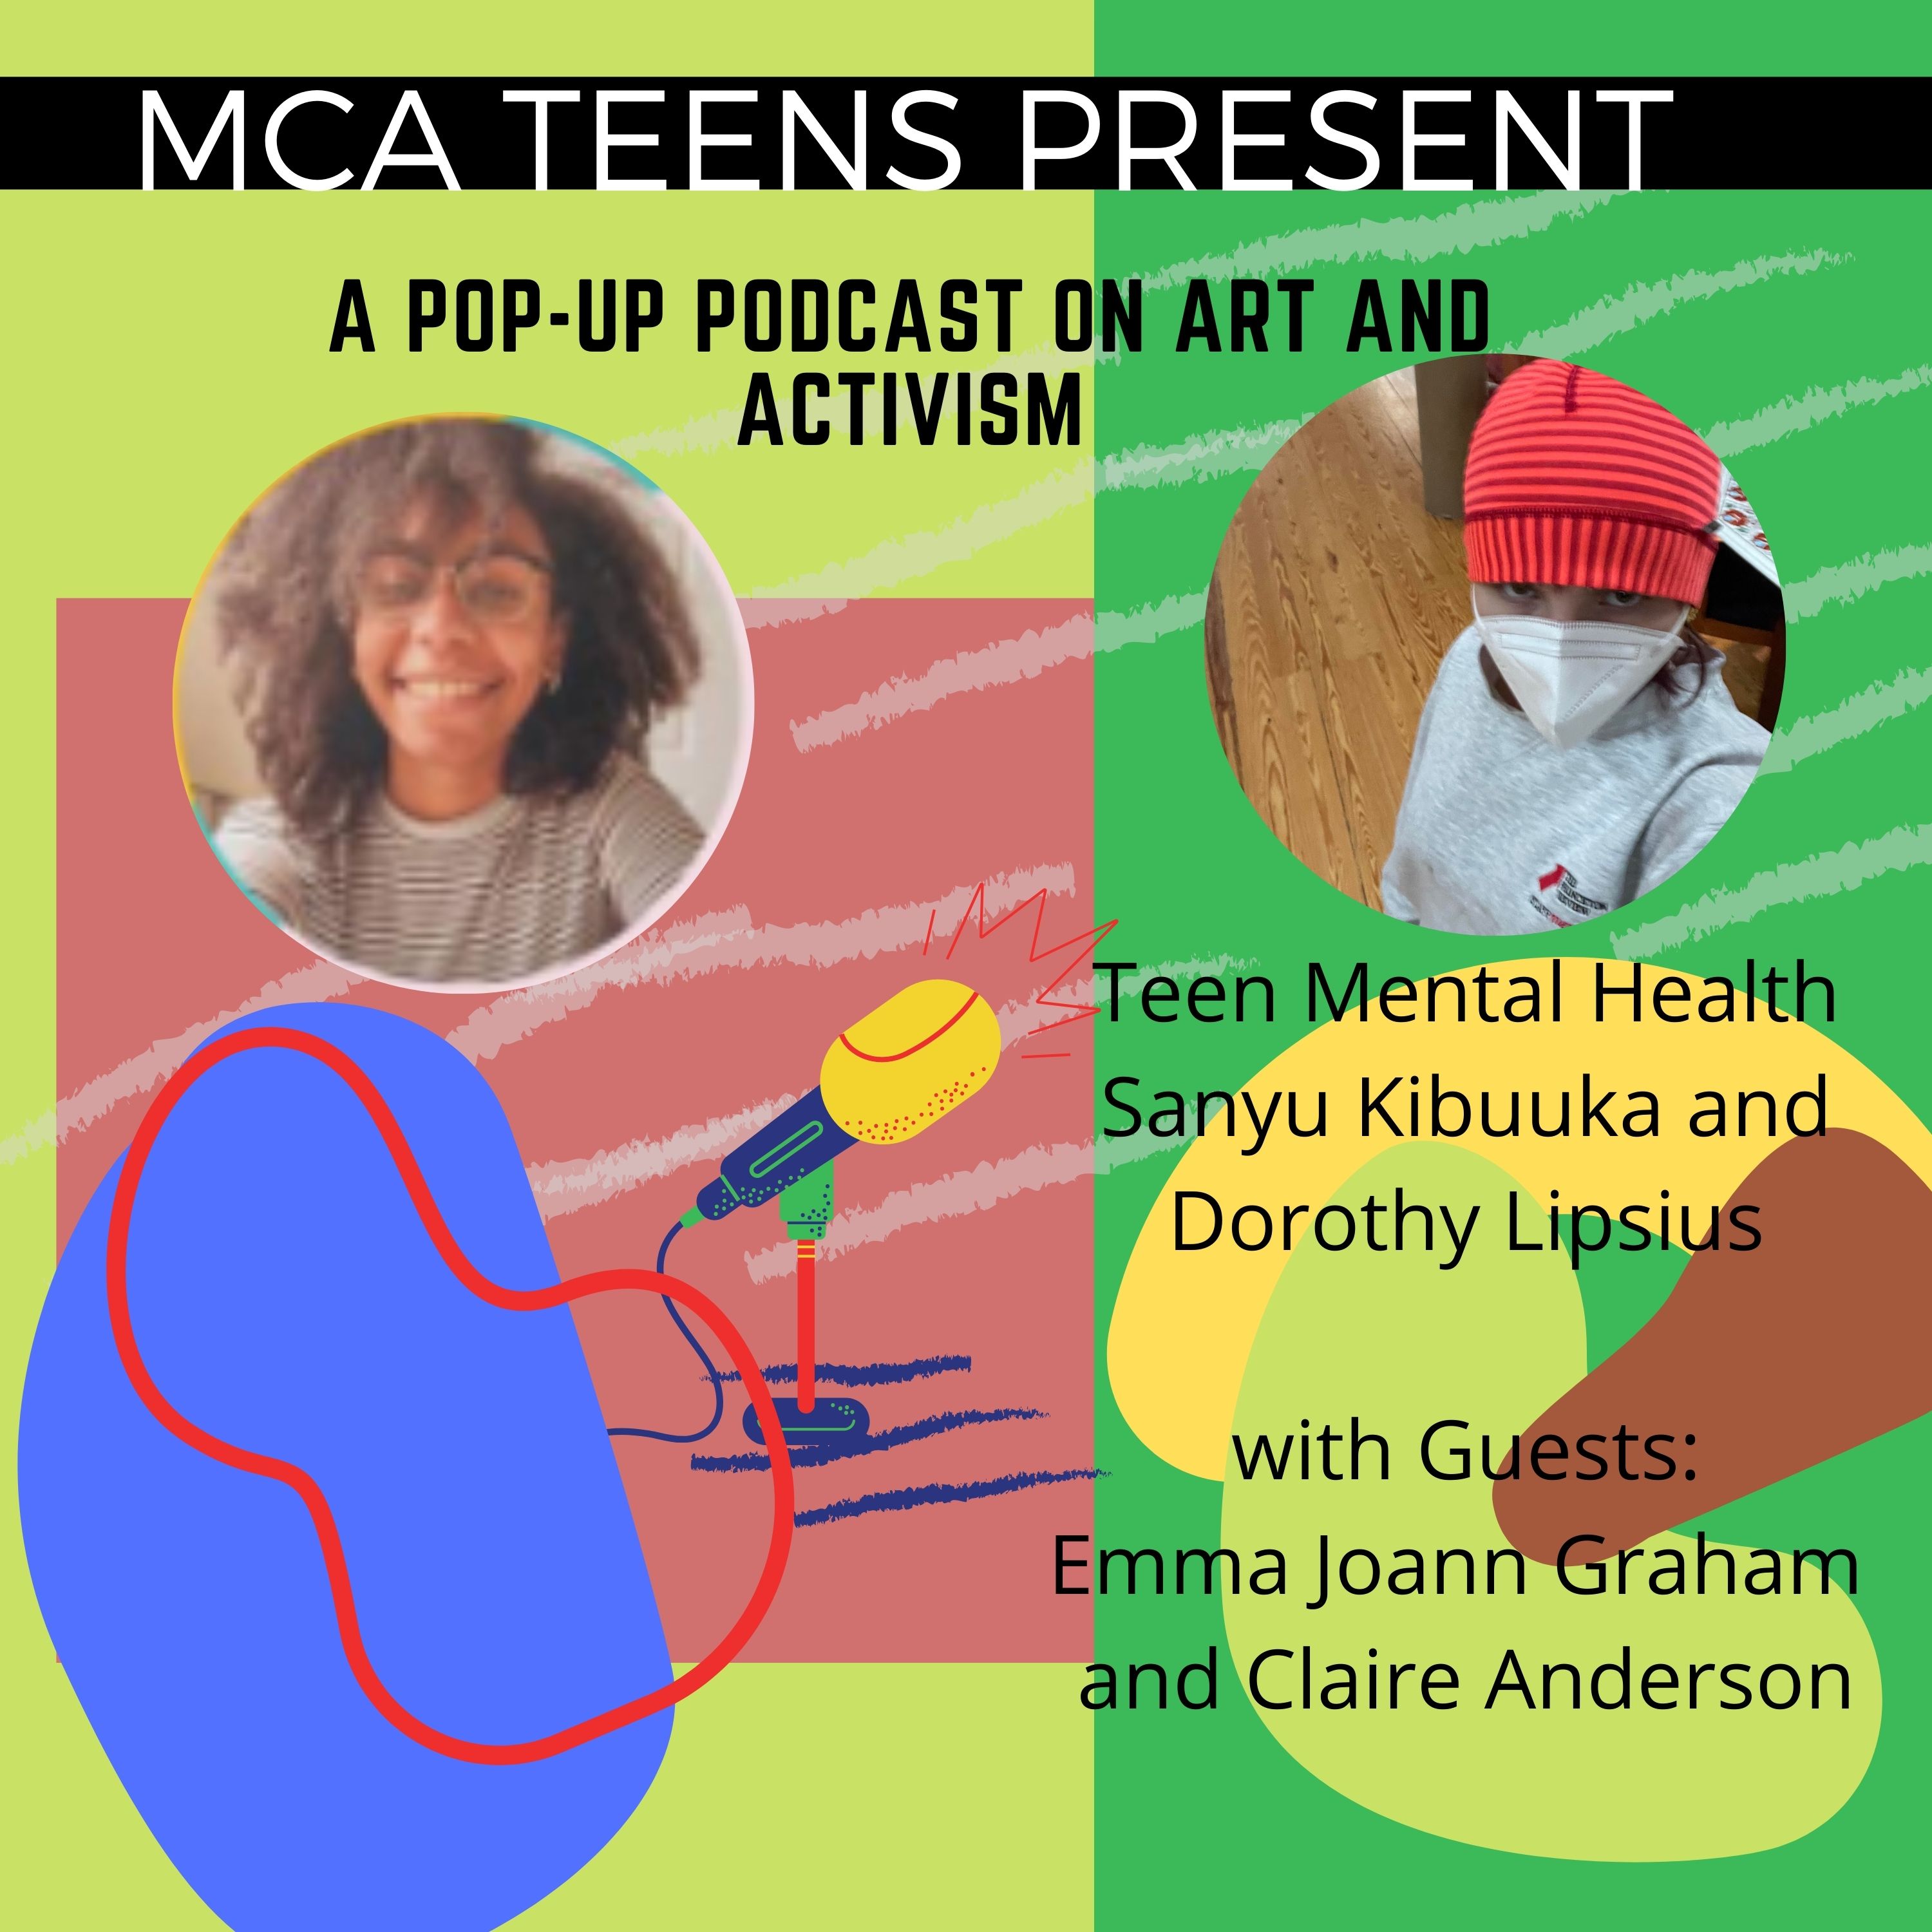 MCA Teens present a pop-up podcast on art and activism: Teen Mental Health hosted by Sanyu Kibuuka and Dorothy Lipsius with guests Emma Joann Graham and Claire Anderson